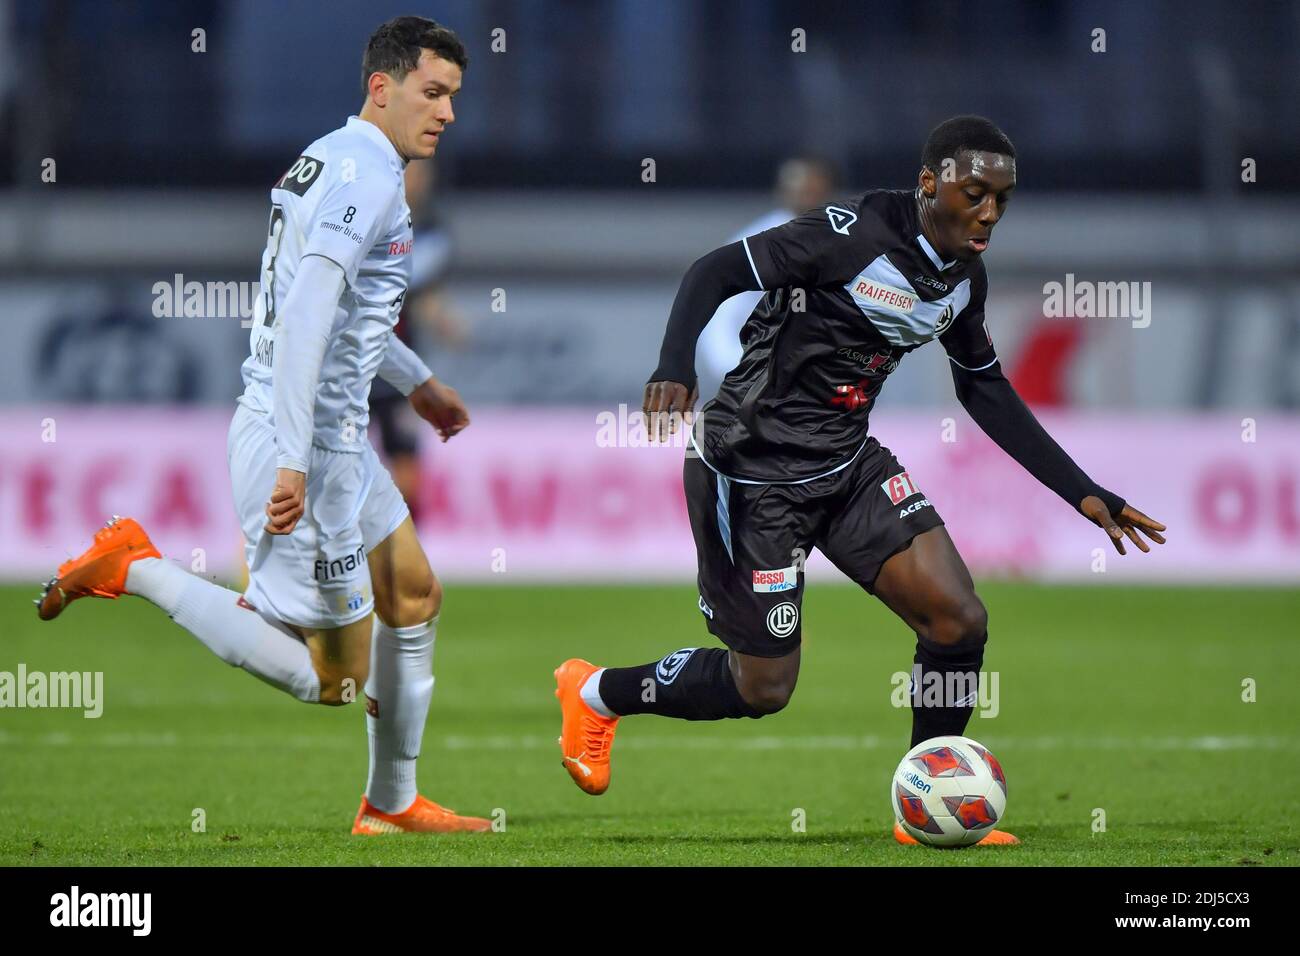 Lugano, Switzerland. 13th Dec, 2020. Cristopher Lungoyi (#8 FC Lugano) and Nathan (#3 Zurich) in action during the Swiss Super League match between FC Lugano and FC Zürich Cristiano Mazzi/SPP Credit: SPP Sport Press Photo. /Alamy Live News Stock Photo